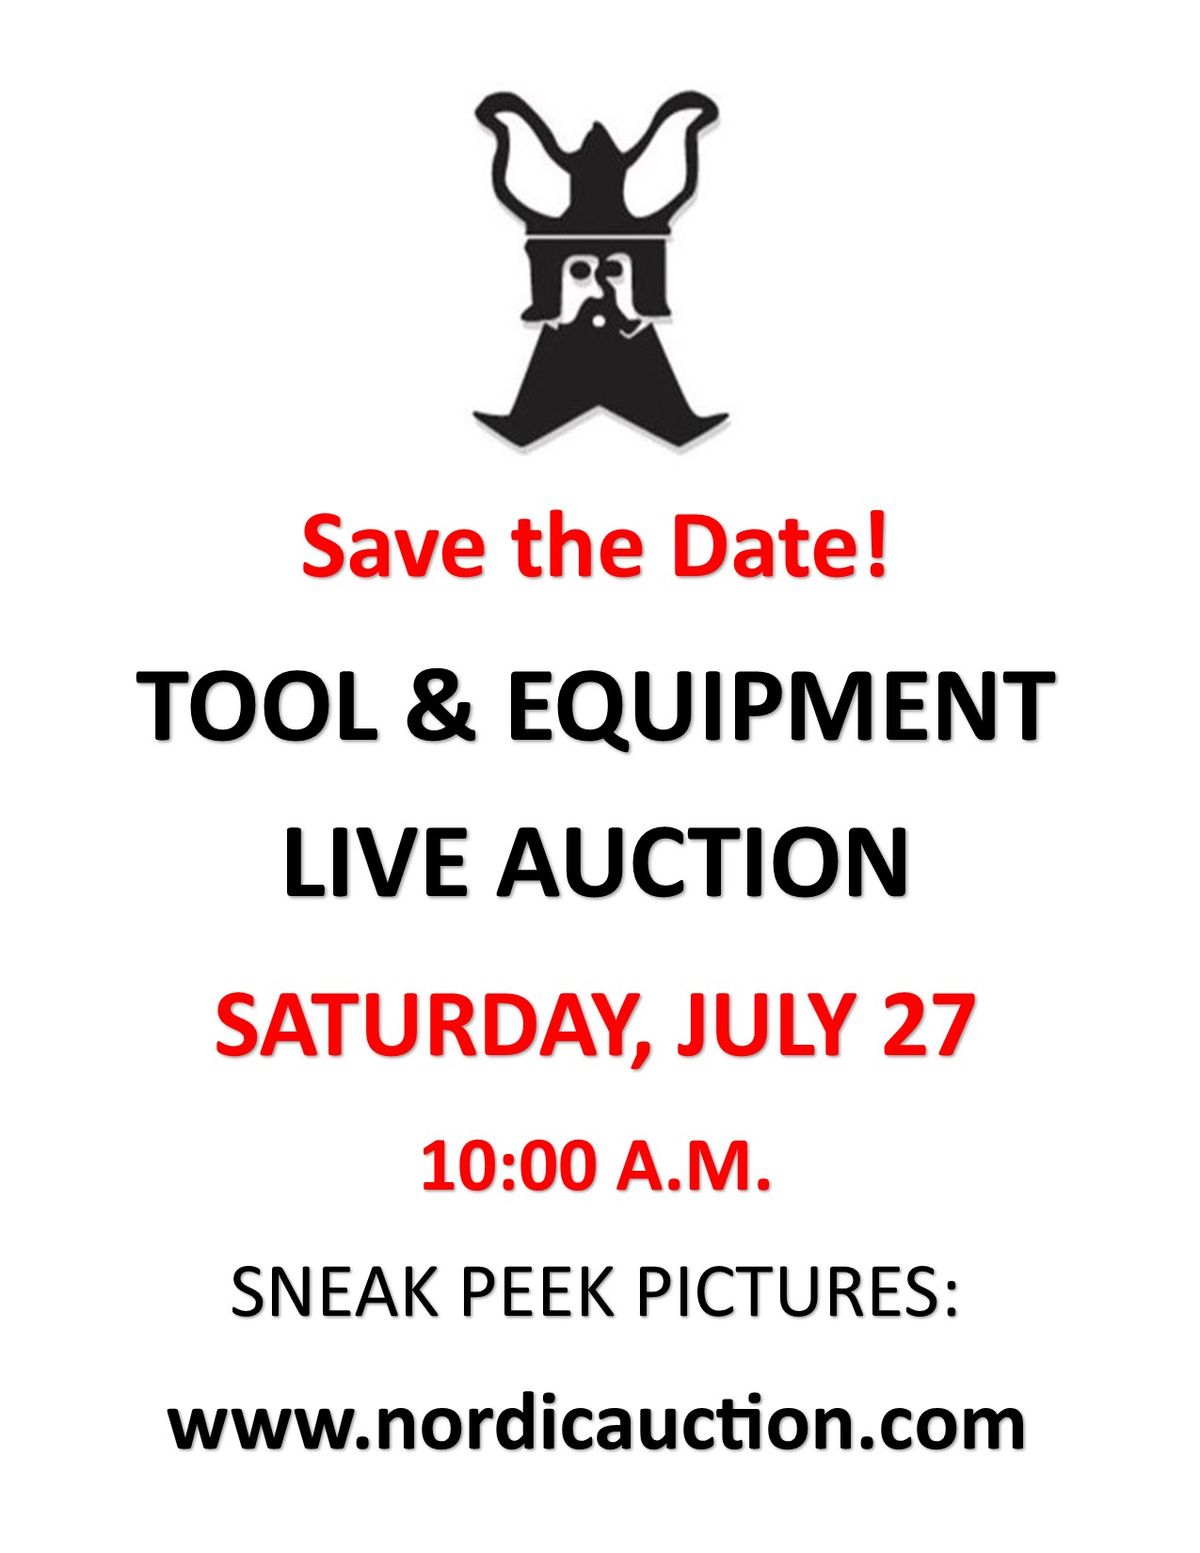 TOOL & EQUIPMENT LIVE AUCTION (July 27) Duluth, MN